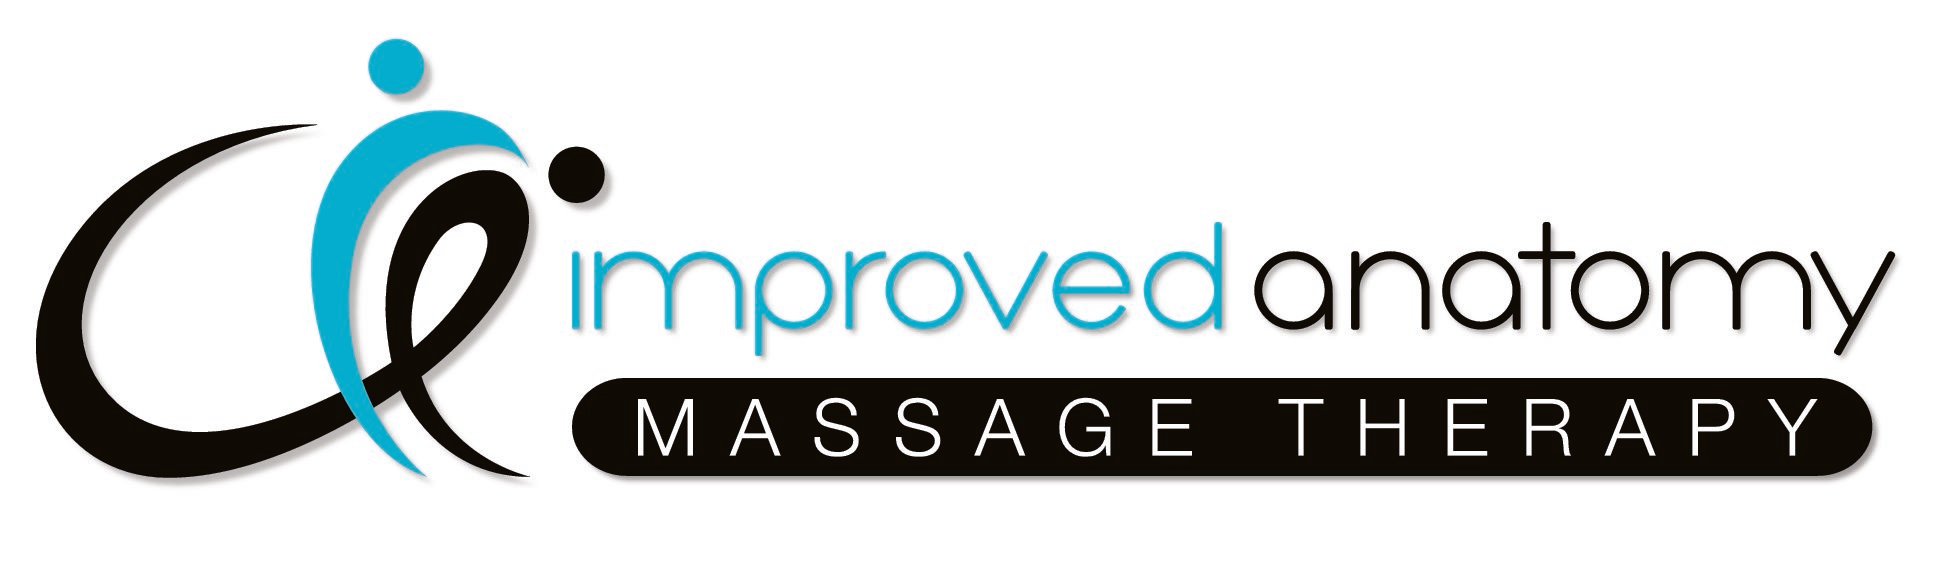 Improved Anatomy Massage Therapy - Home